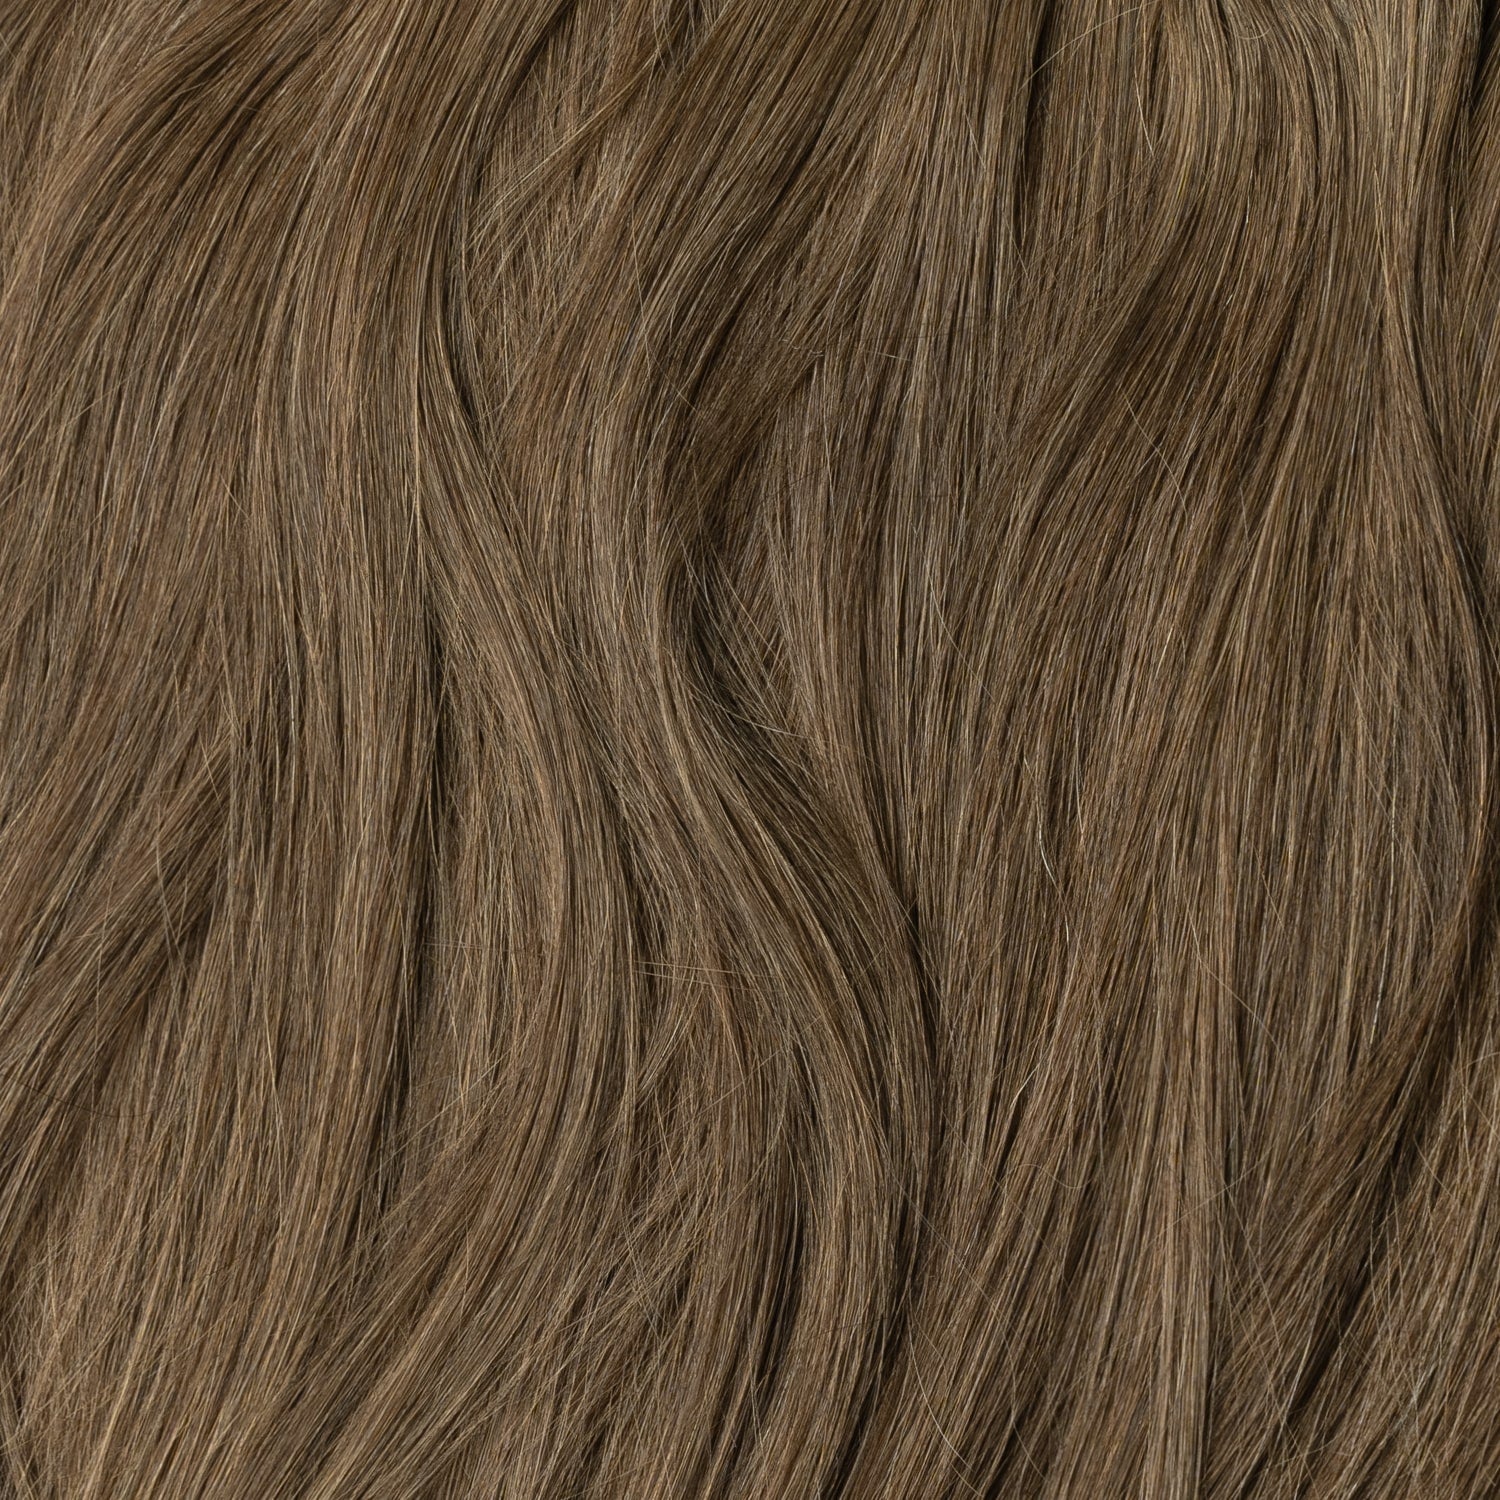 Halo extensions - Ash Brown 3B